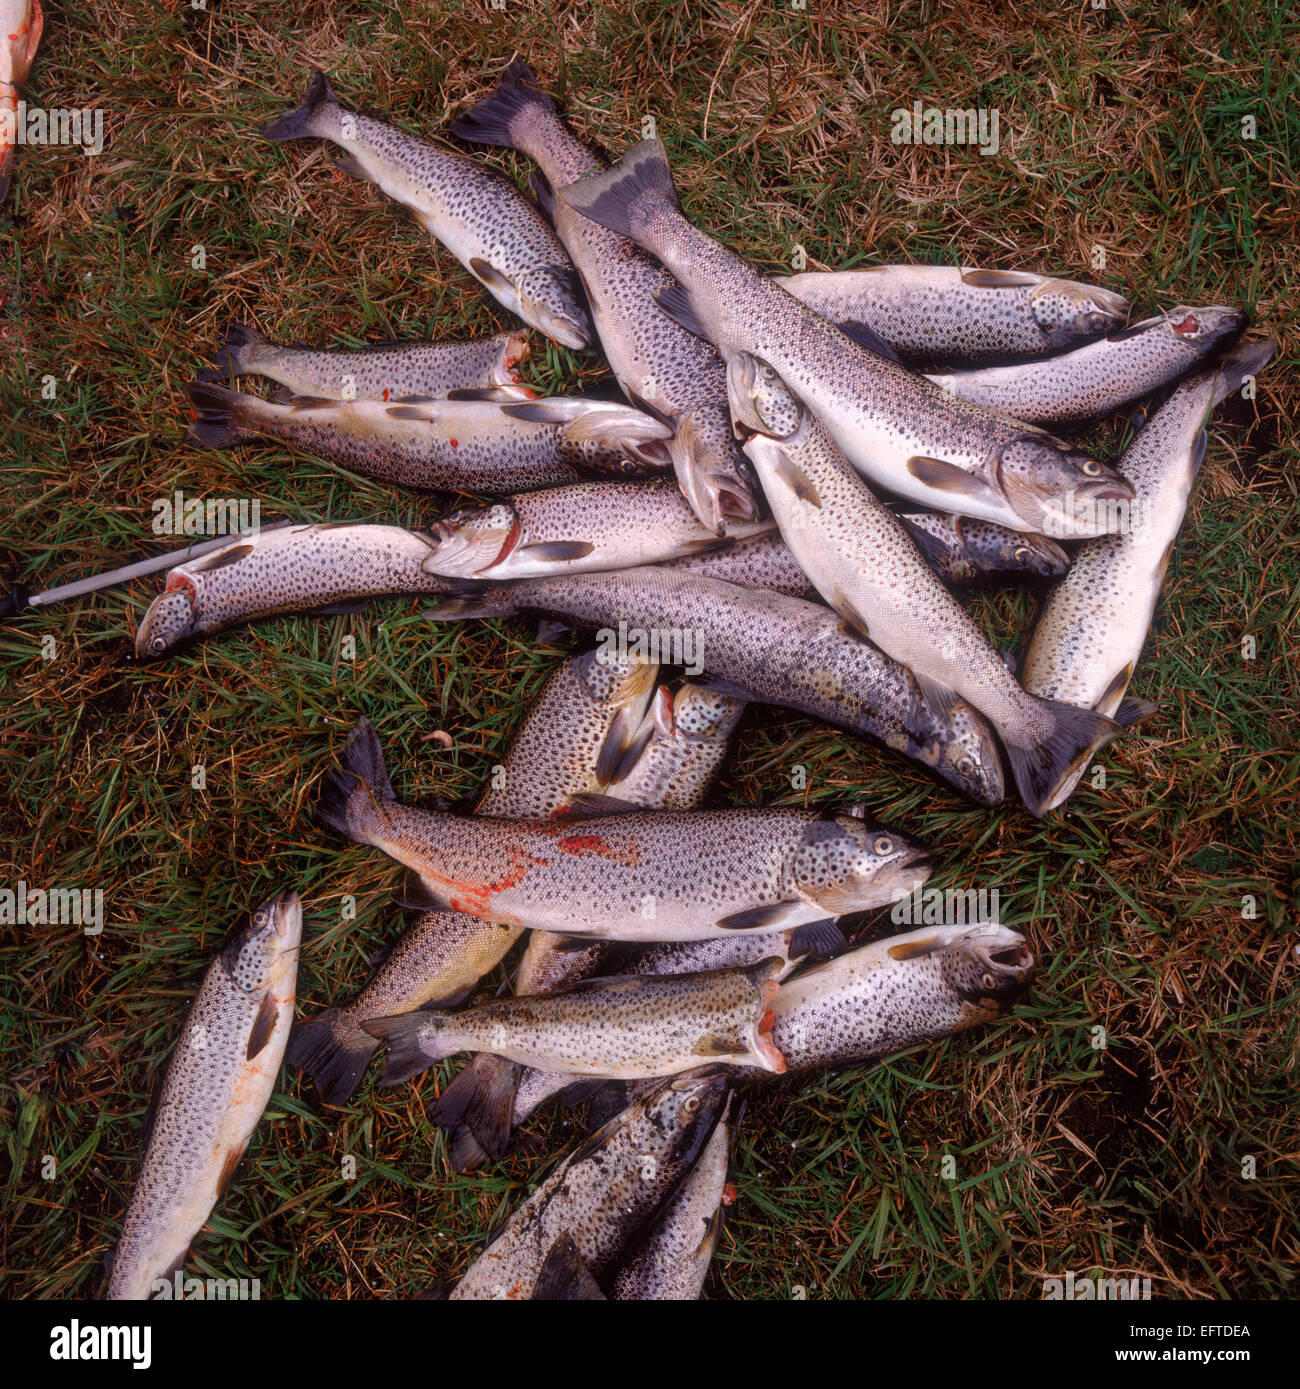 Arctic char or trout freshly caught, Iceland Stock Photo